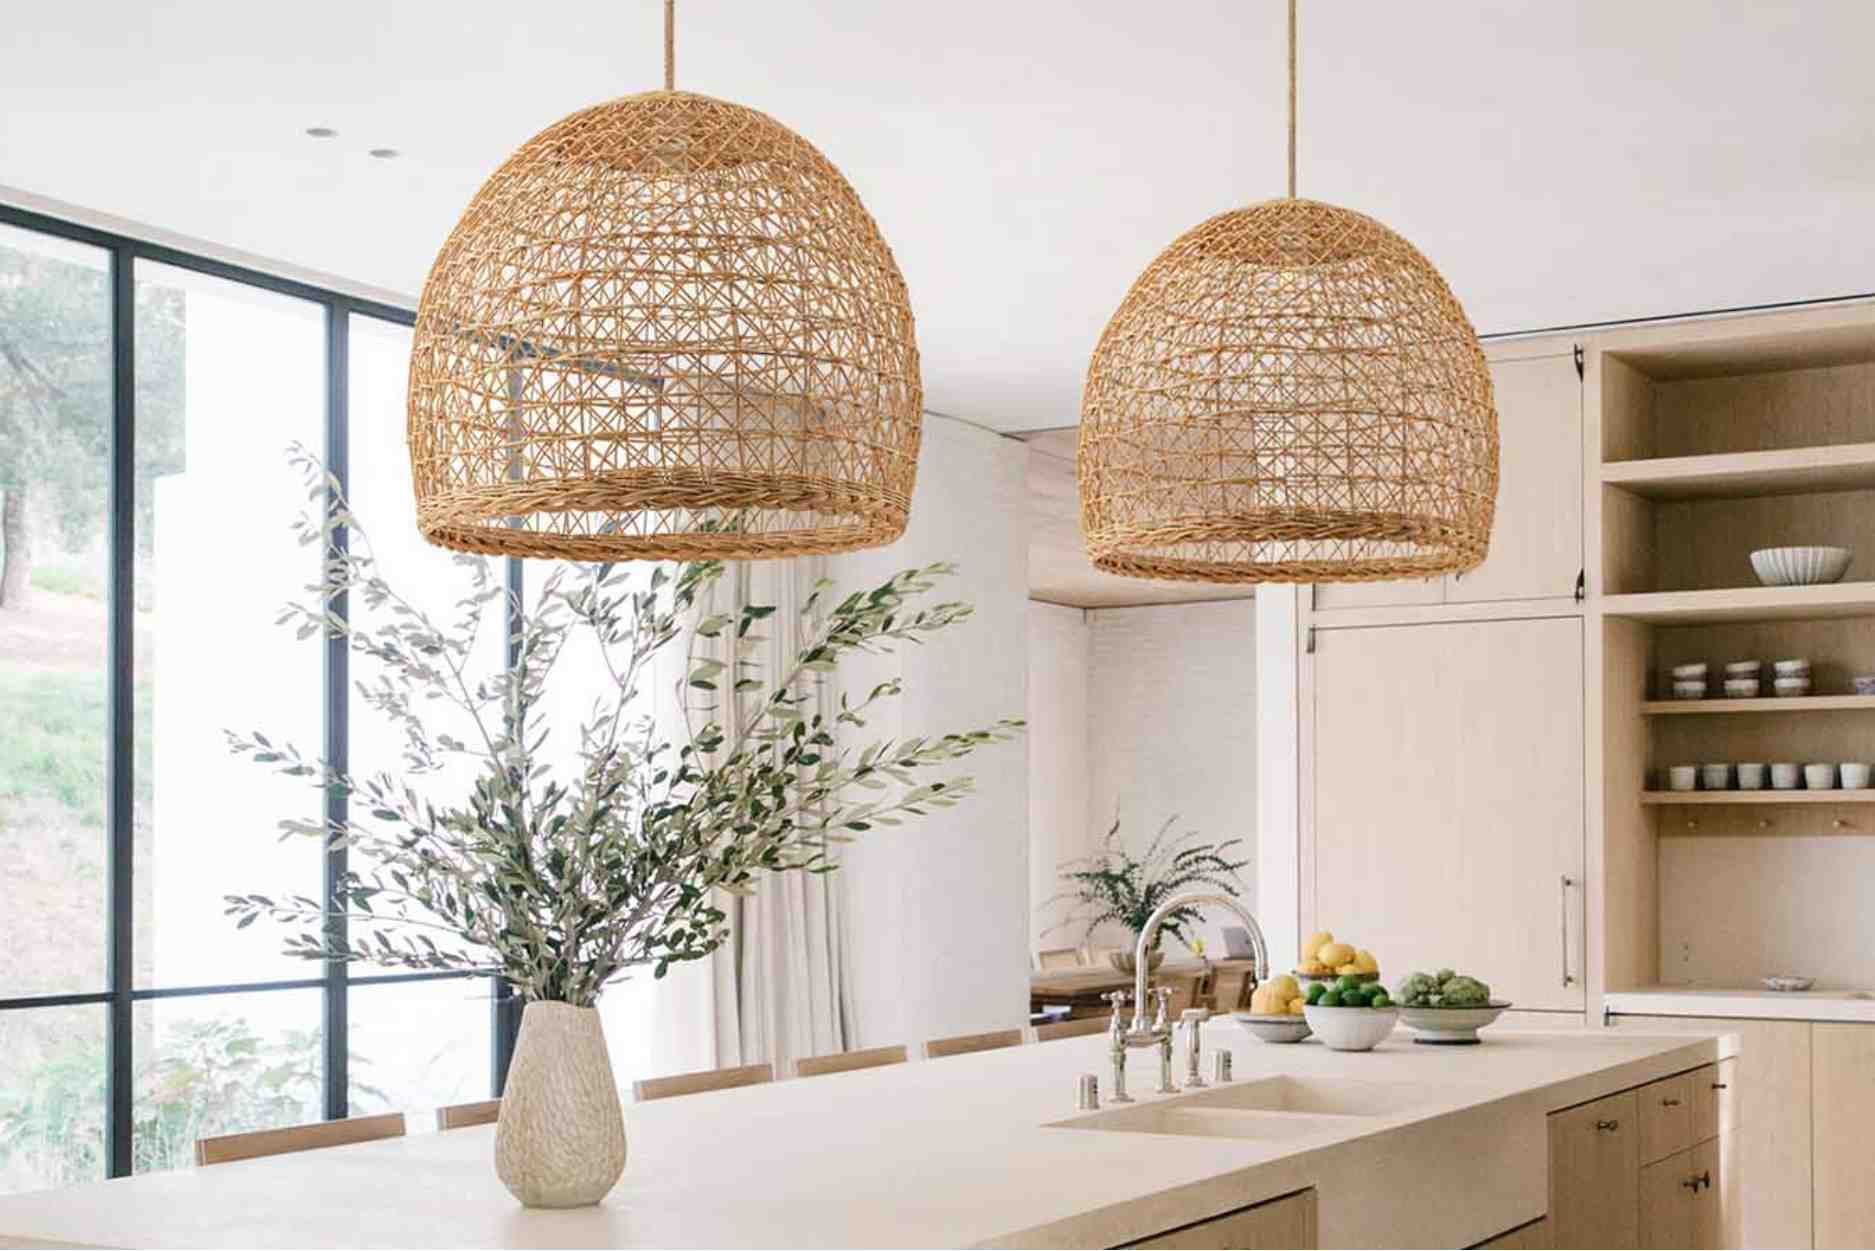 the lumiere bowl rattan pendant light is popular for kitchen islands